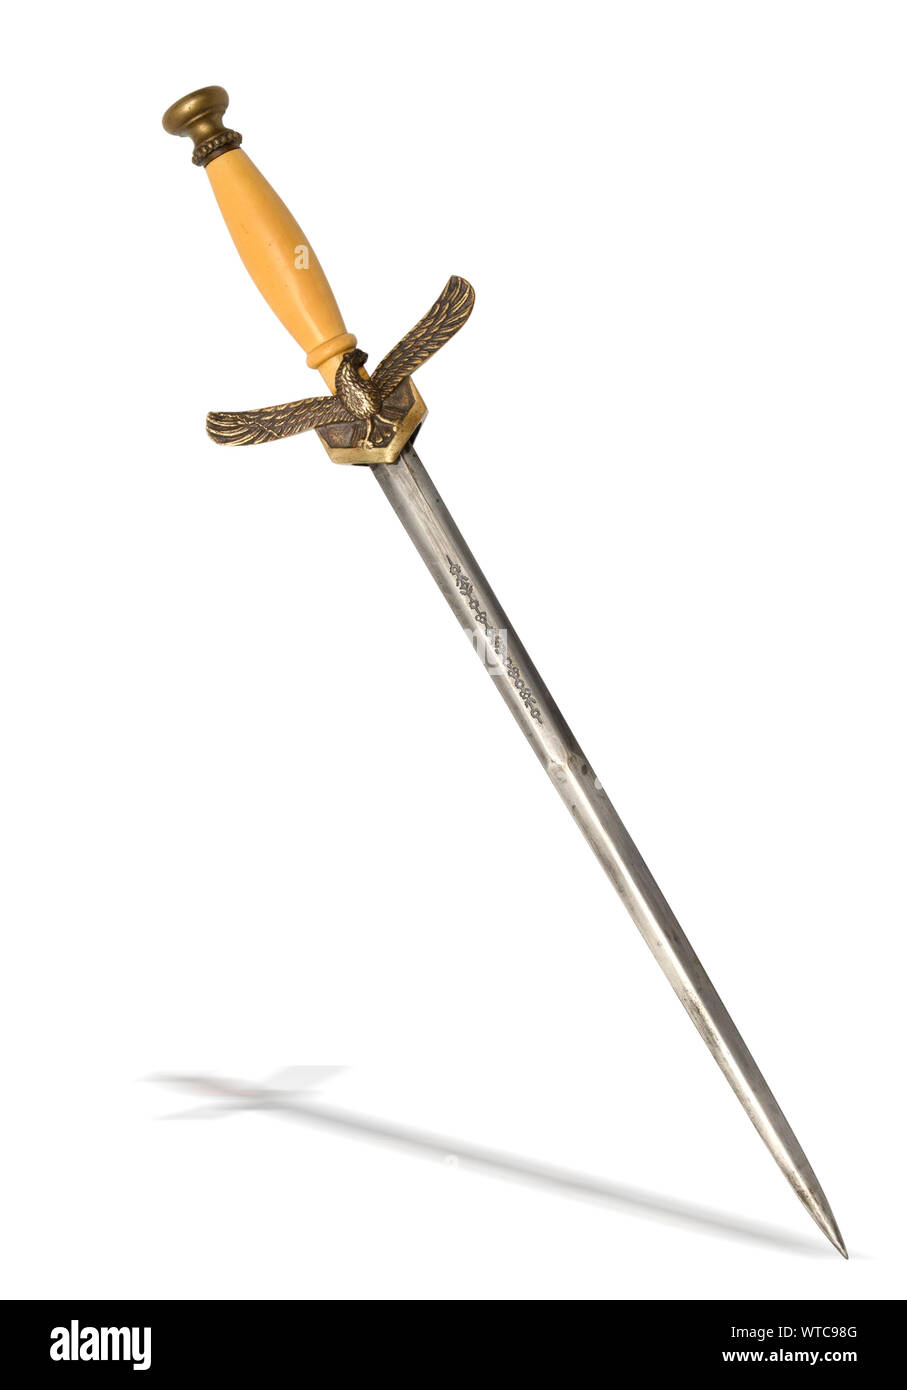 A South African M1965 Air Force Non-Commissioned Officer’s Dress Dagger, unmarked blade with ornate floral etchings on both sides, brass crossguard wi Stock Photo